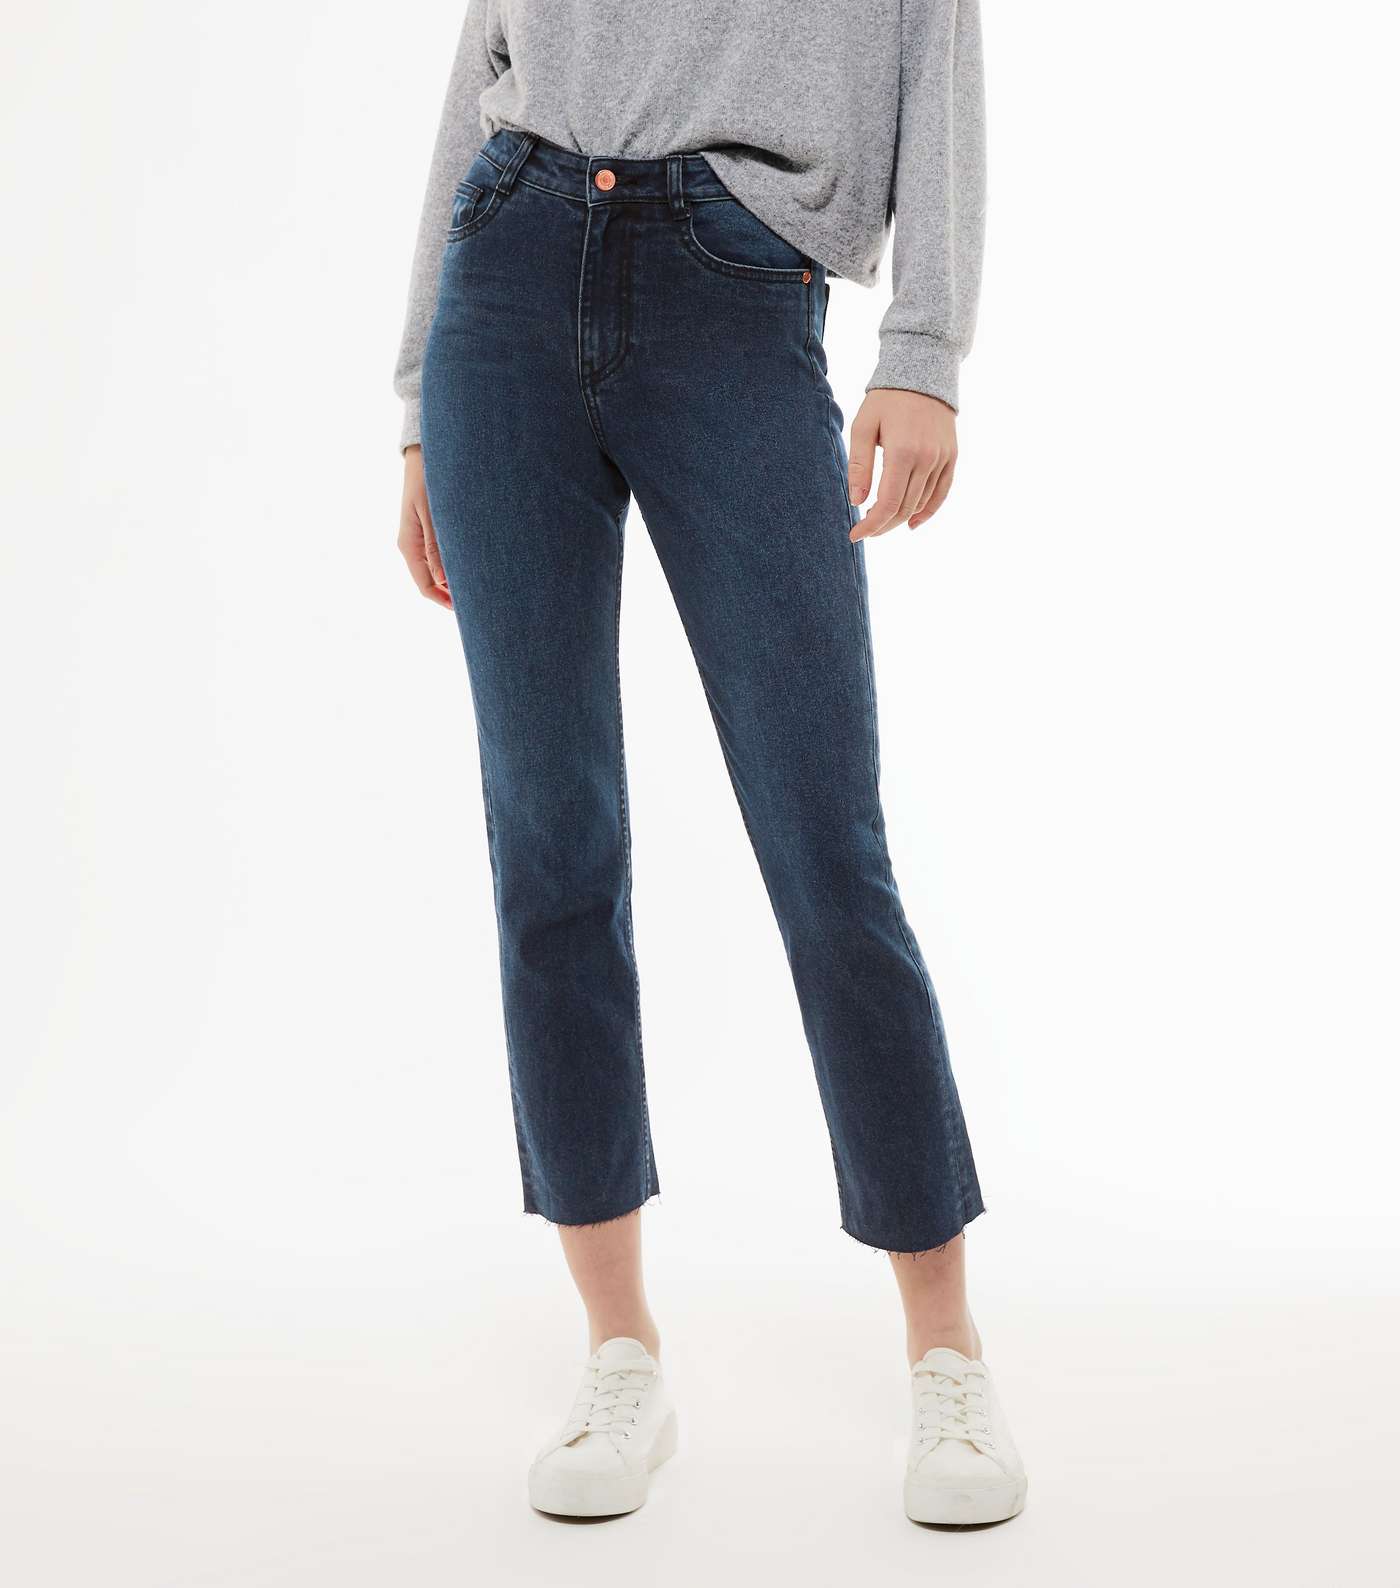 Navy Ankle Grazing Hannah Straight Leg Jeans Image 2